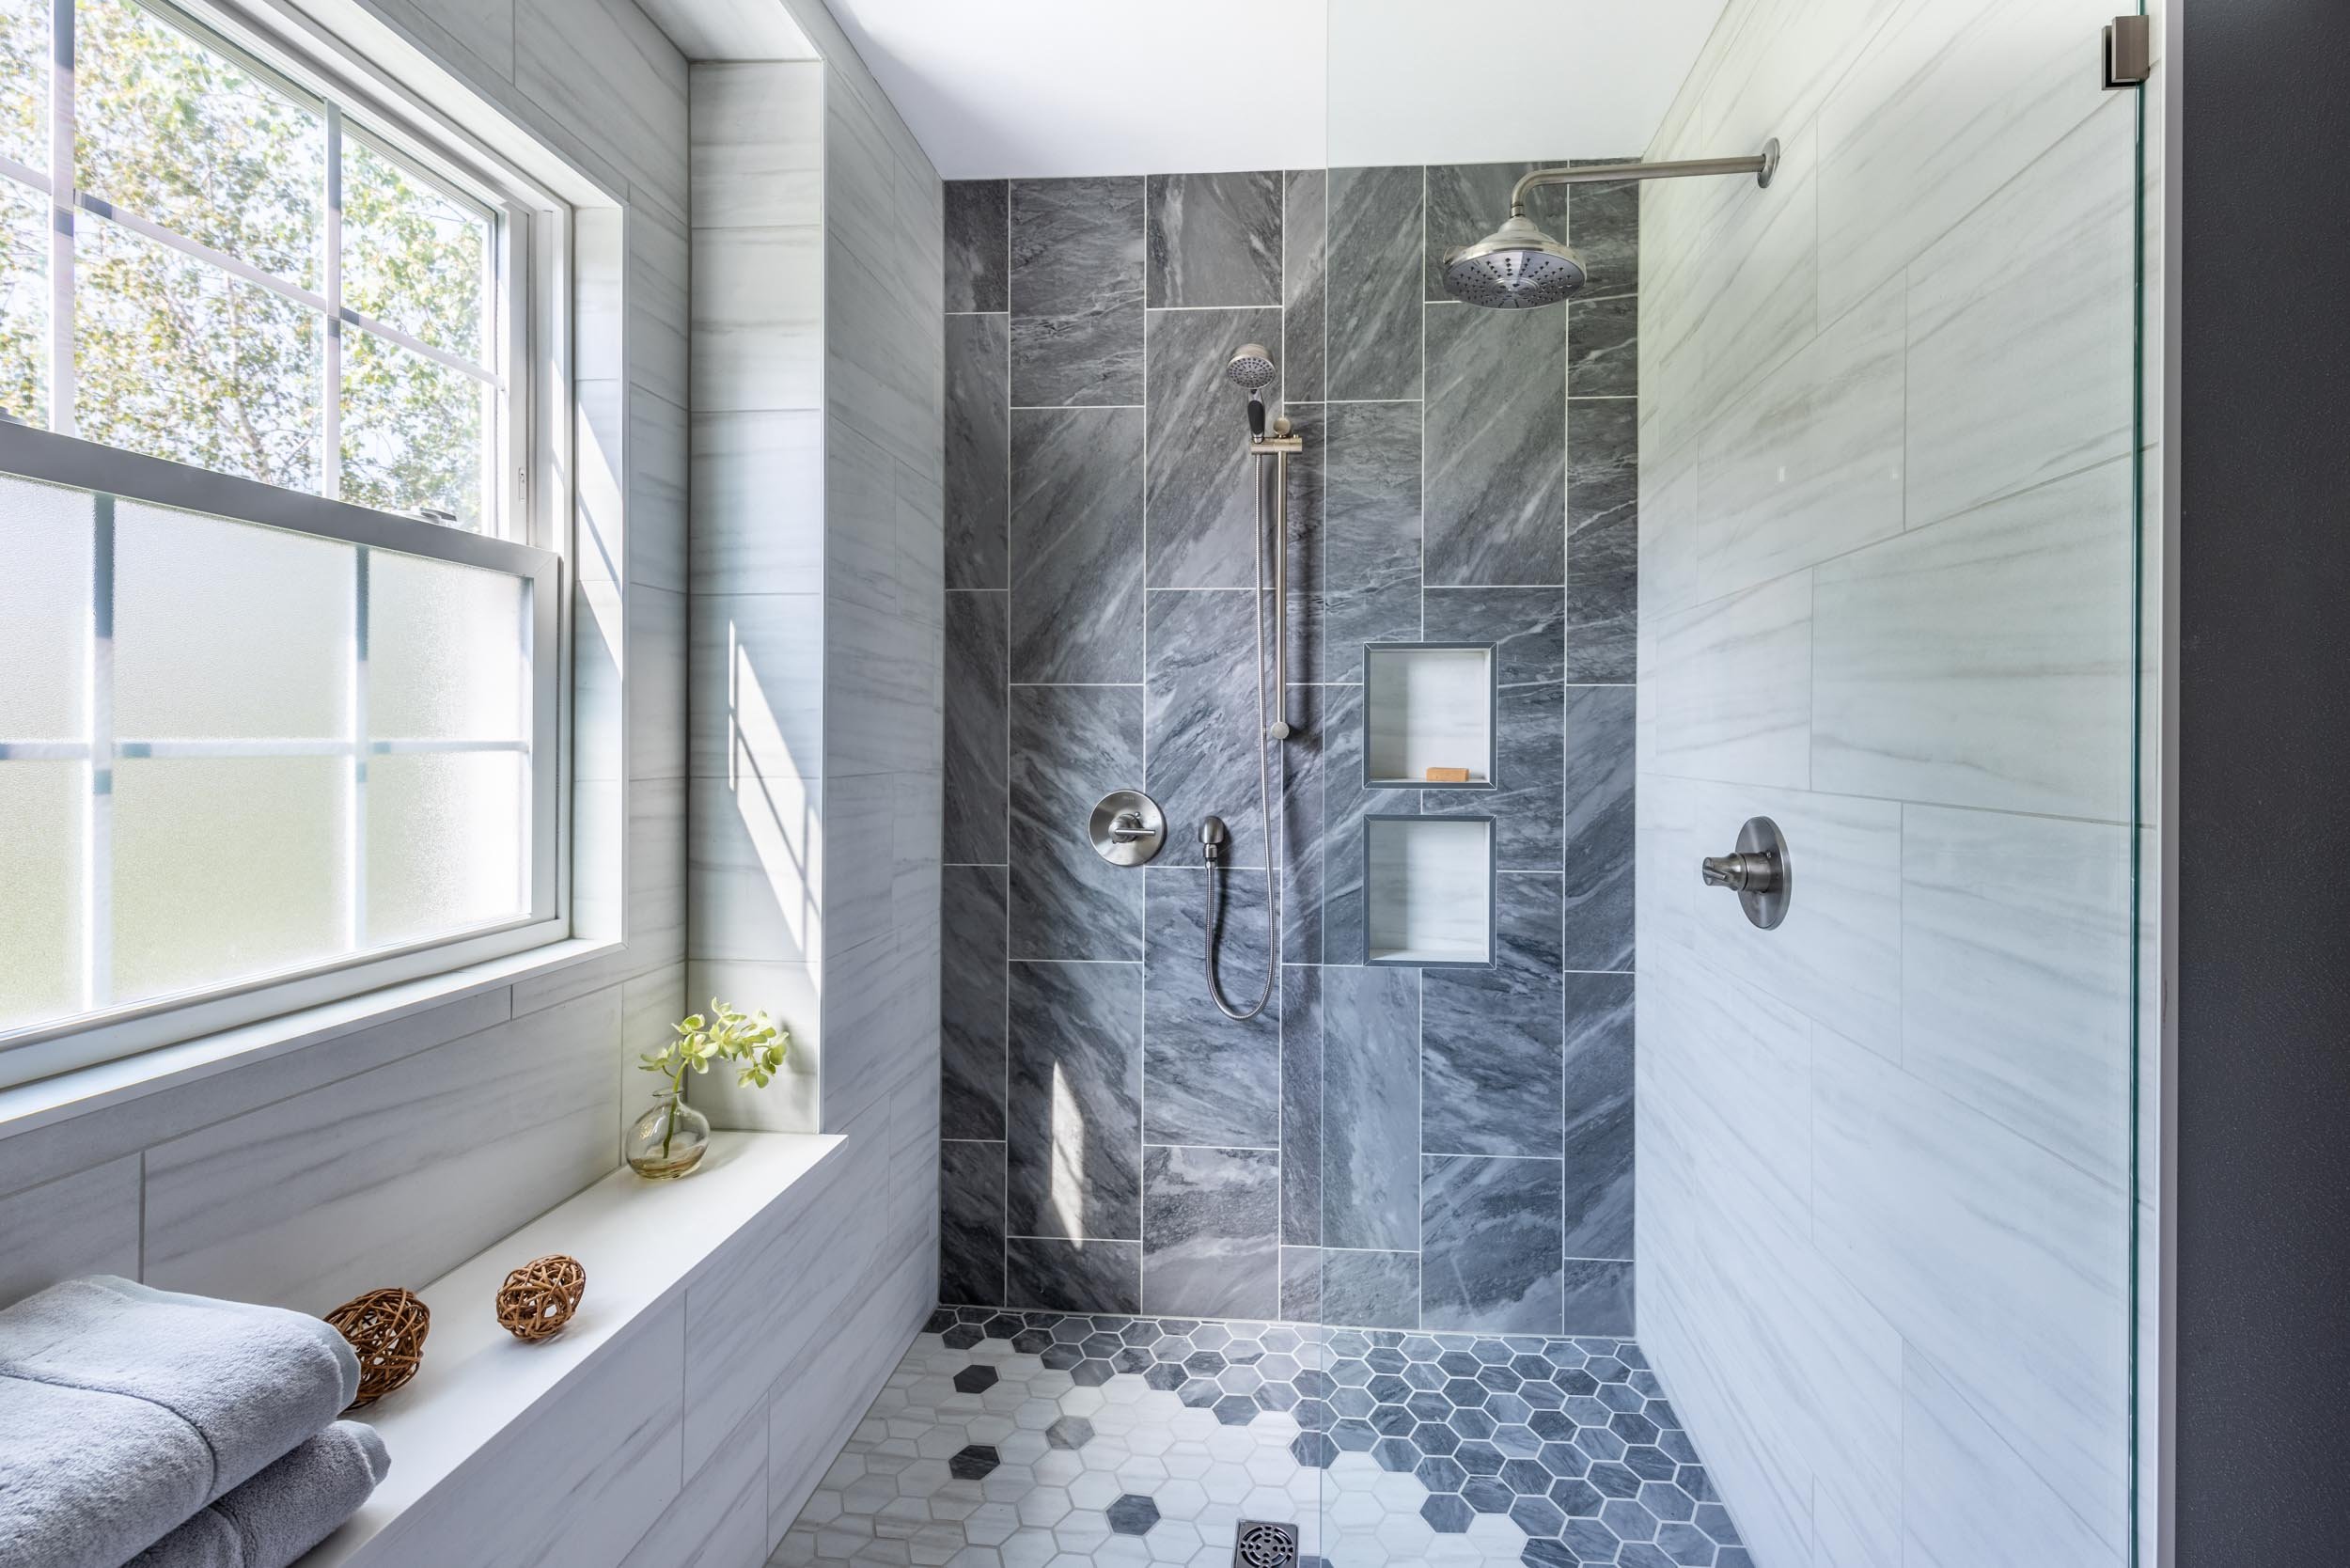 Design Features Homeowners Want In A Bathroom Remodel Now — Degnan Design -Build-Remodel